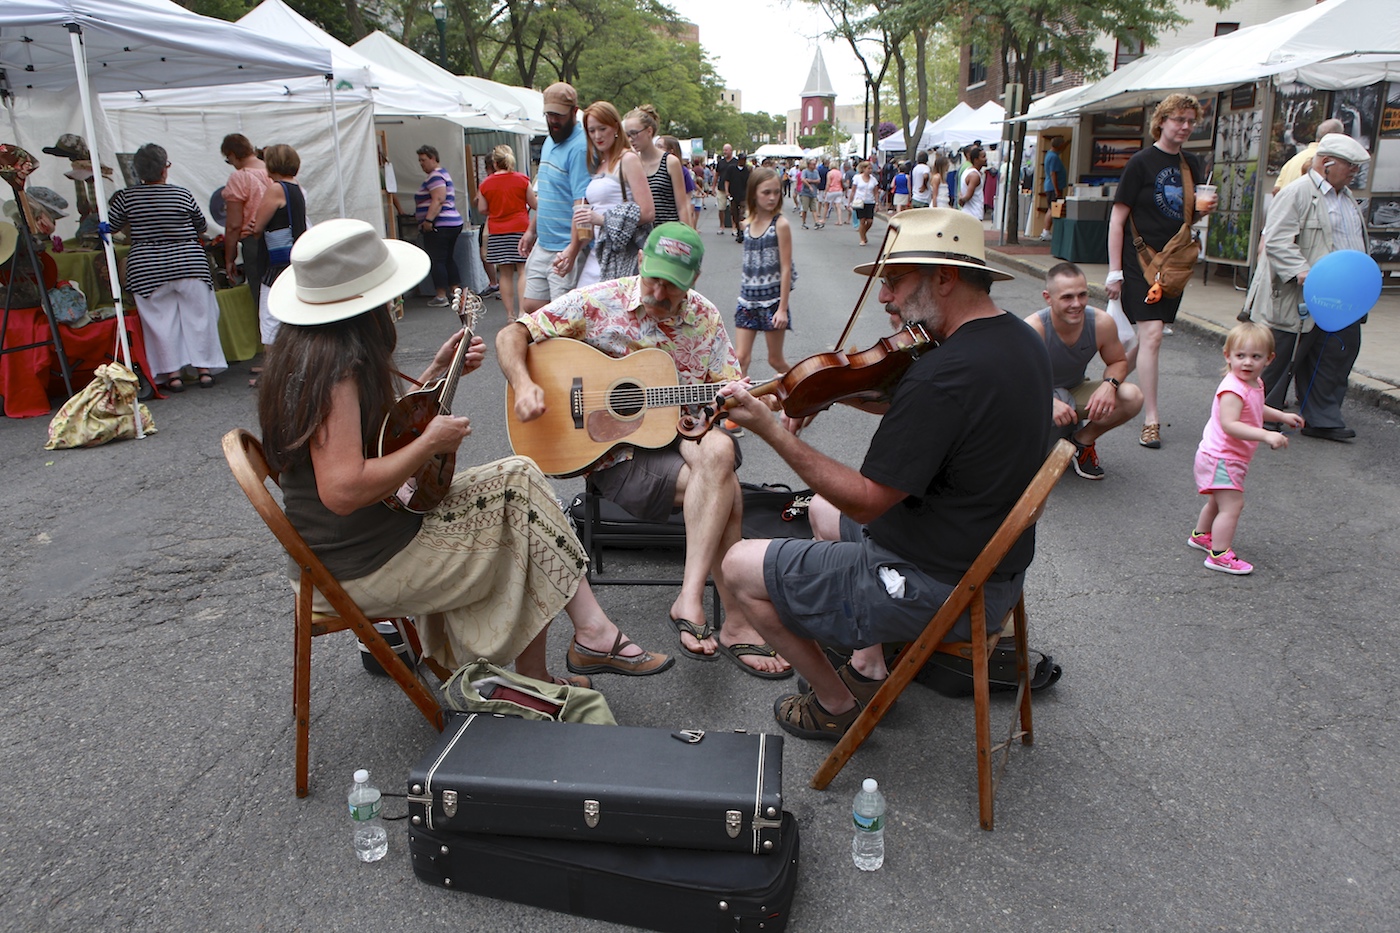 A shot of a trio playing musical instruments in the street during the Arts Week arts and crafts fair.